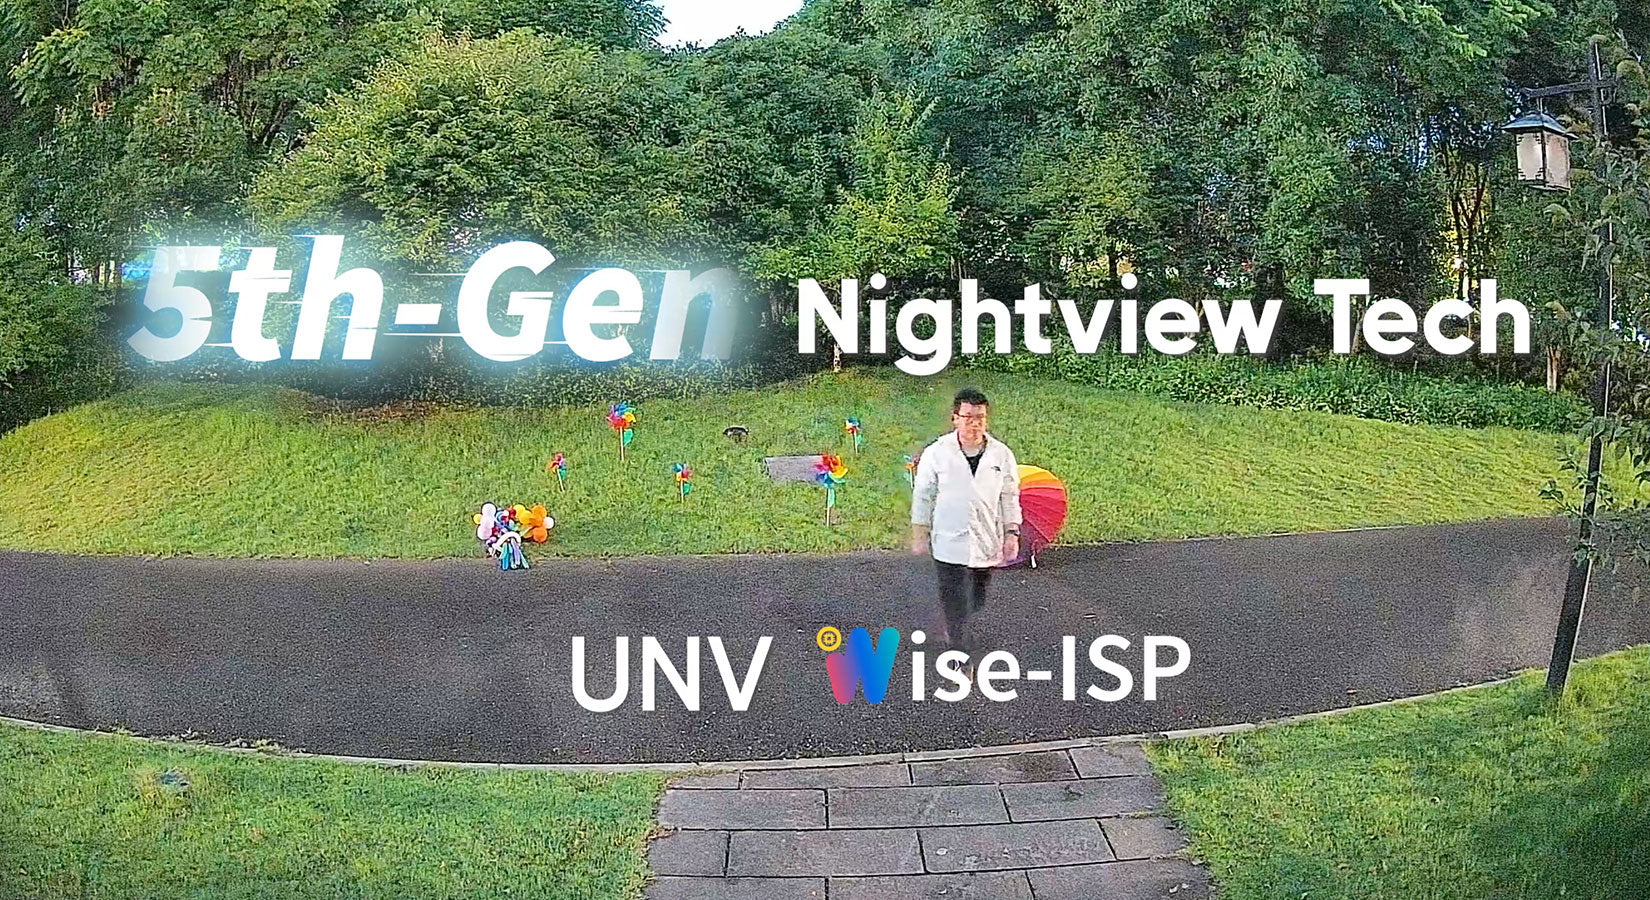 UNV Wise-ISP Technology: Never-Before-Seen Night Vision | All Security Equipment